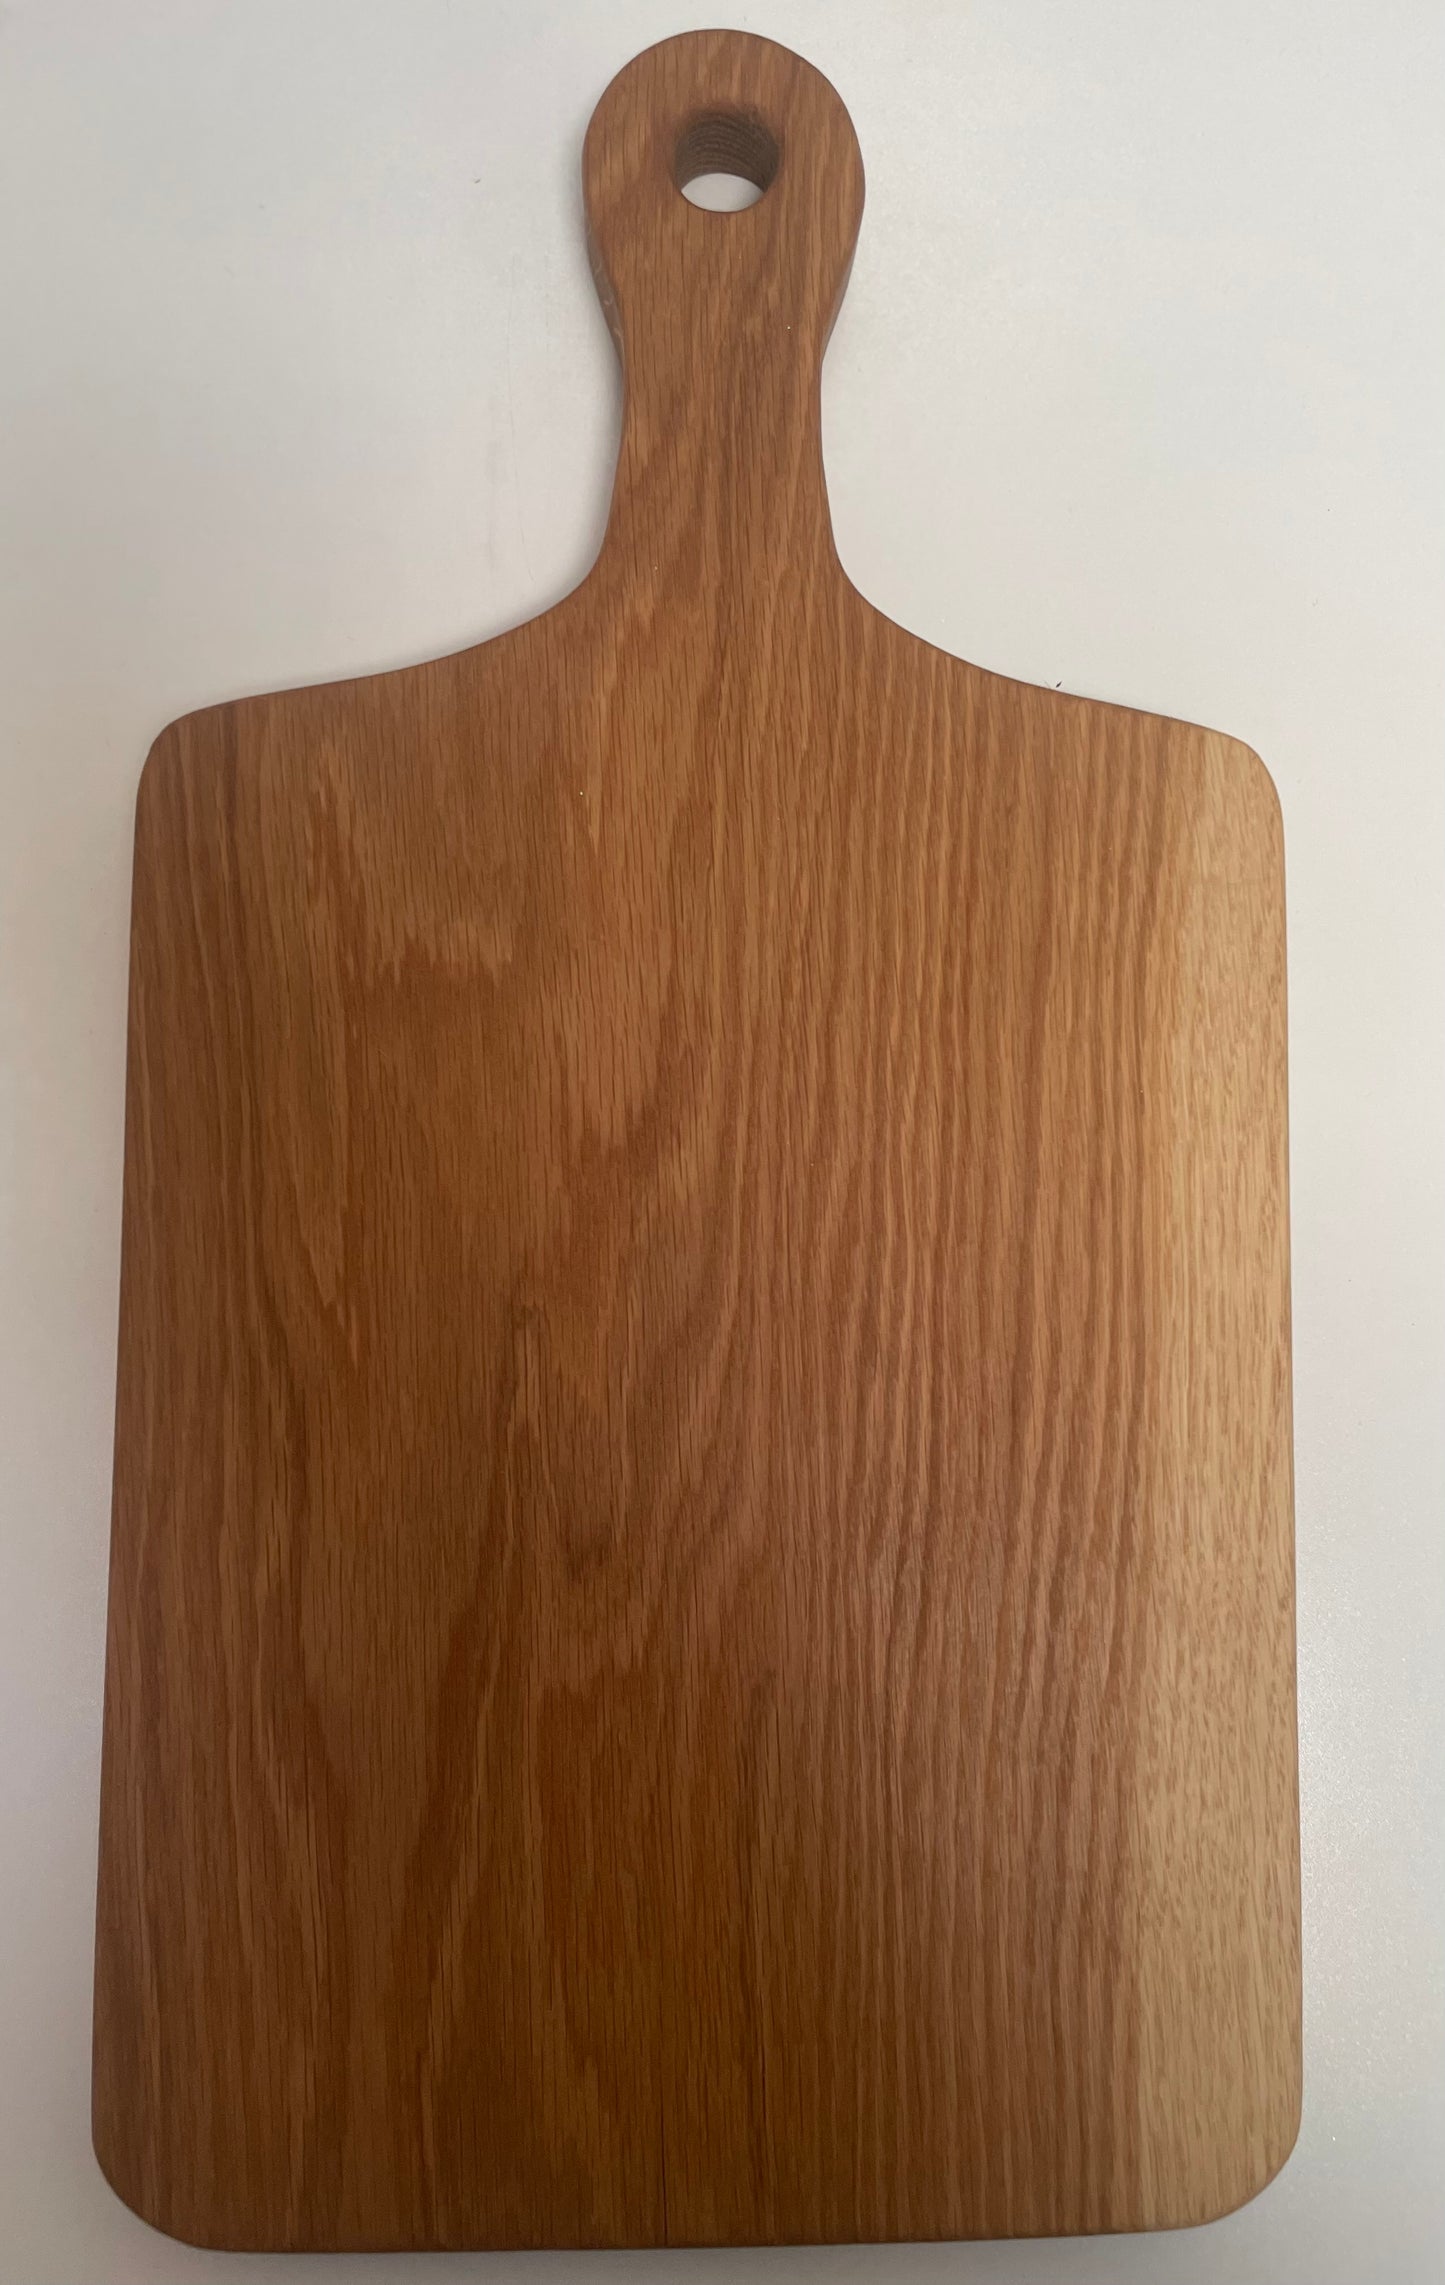 23SV01 - Large Solid Cherry Handle Board